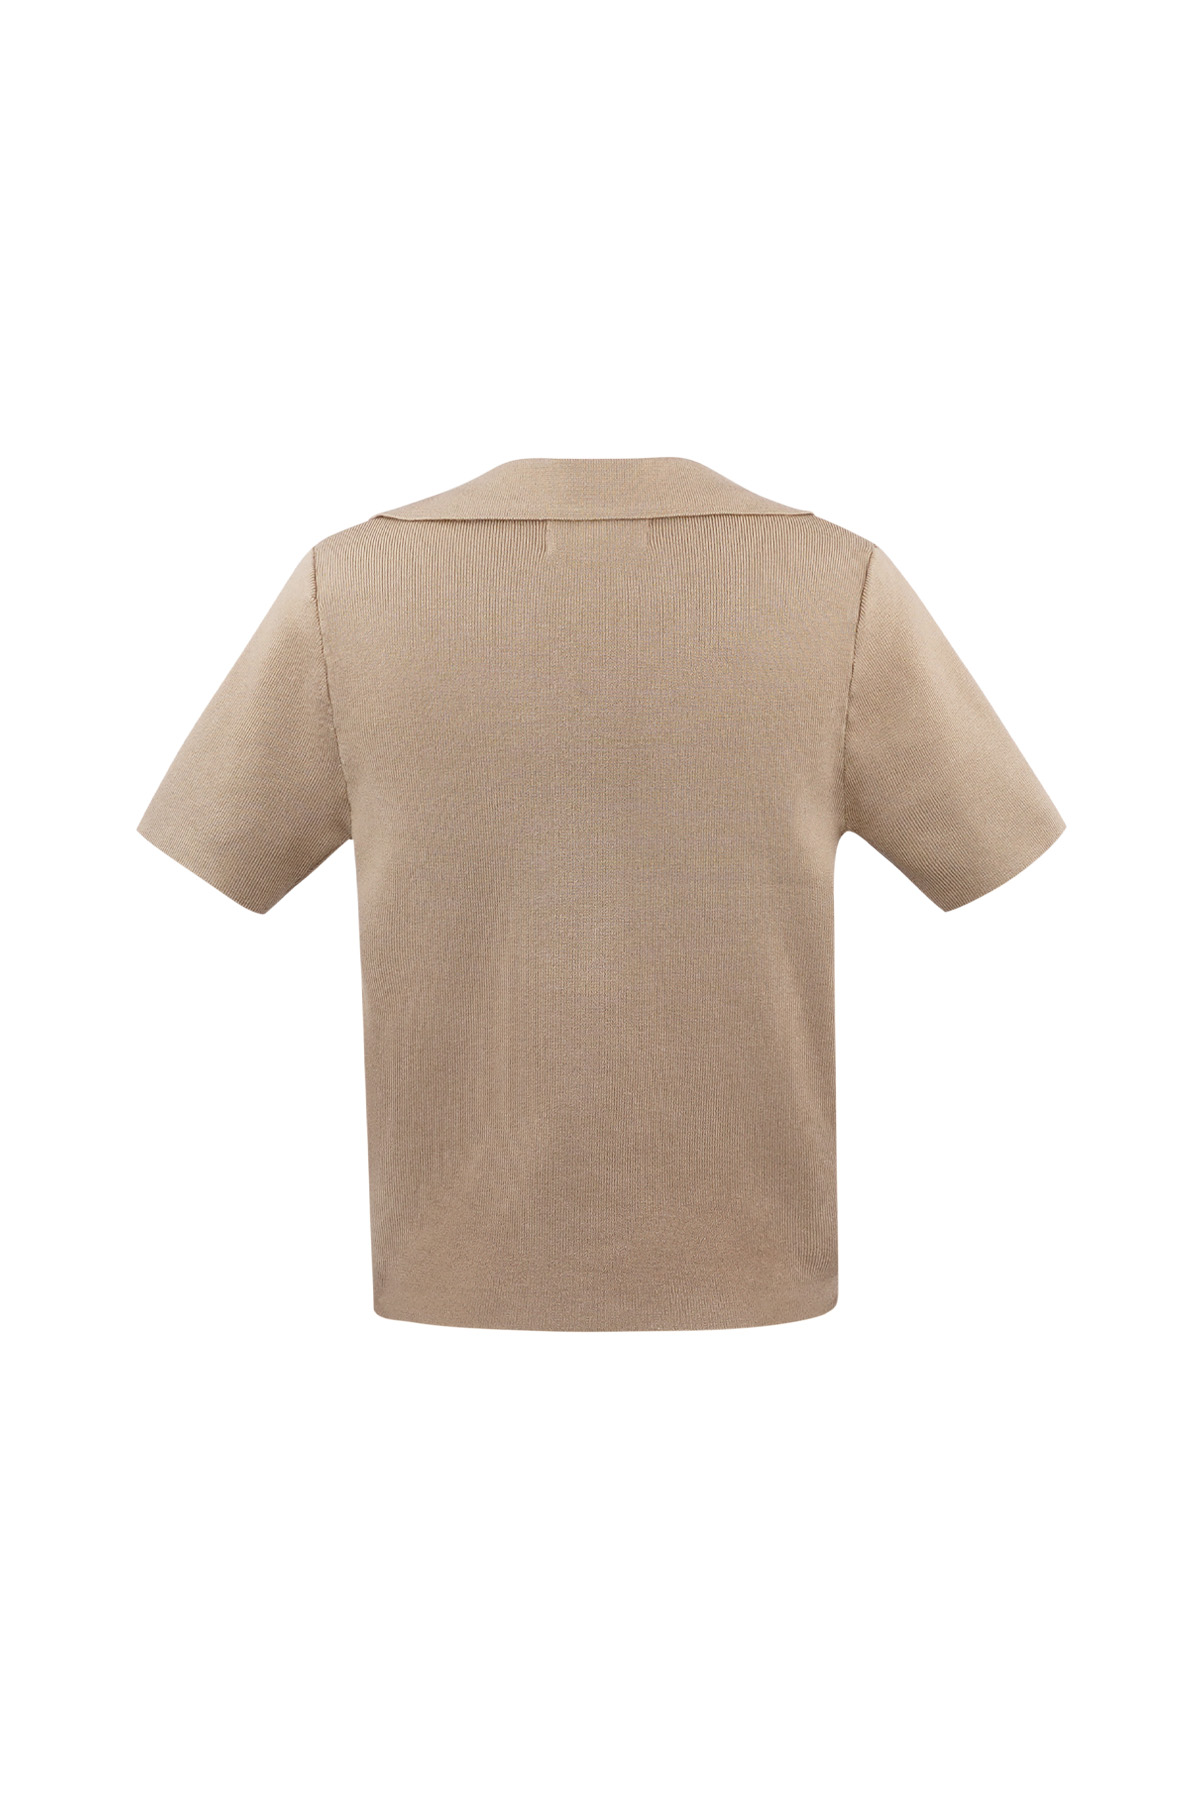 Polo demi-boutonné grand/extra large – beige h5 Image7